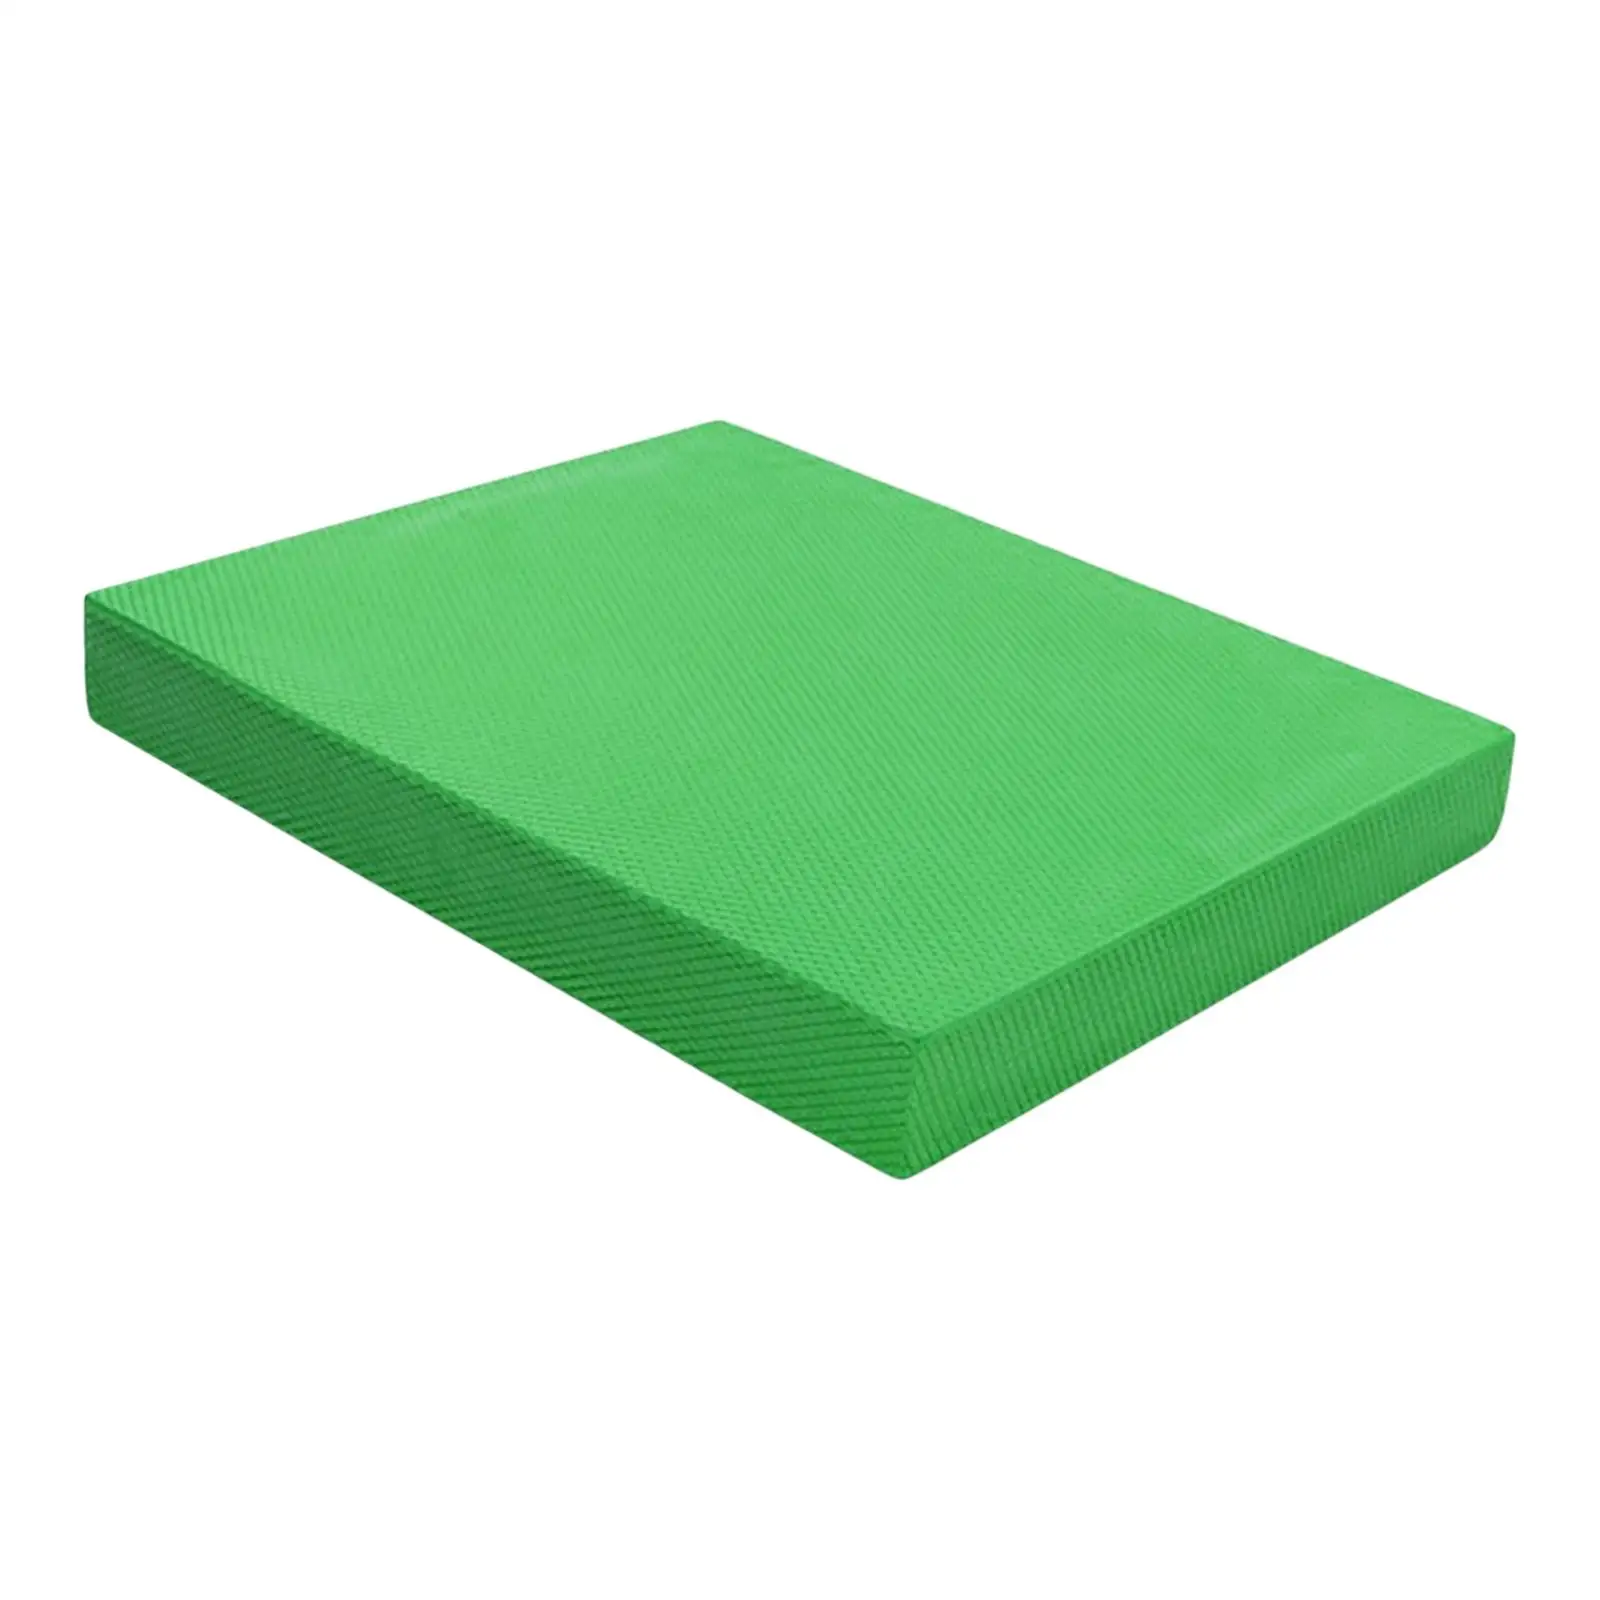 Balance Pad Trainer Yoga Mat Foam Mat for Stretching Stability Home Gym green